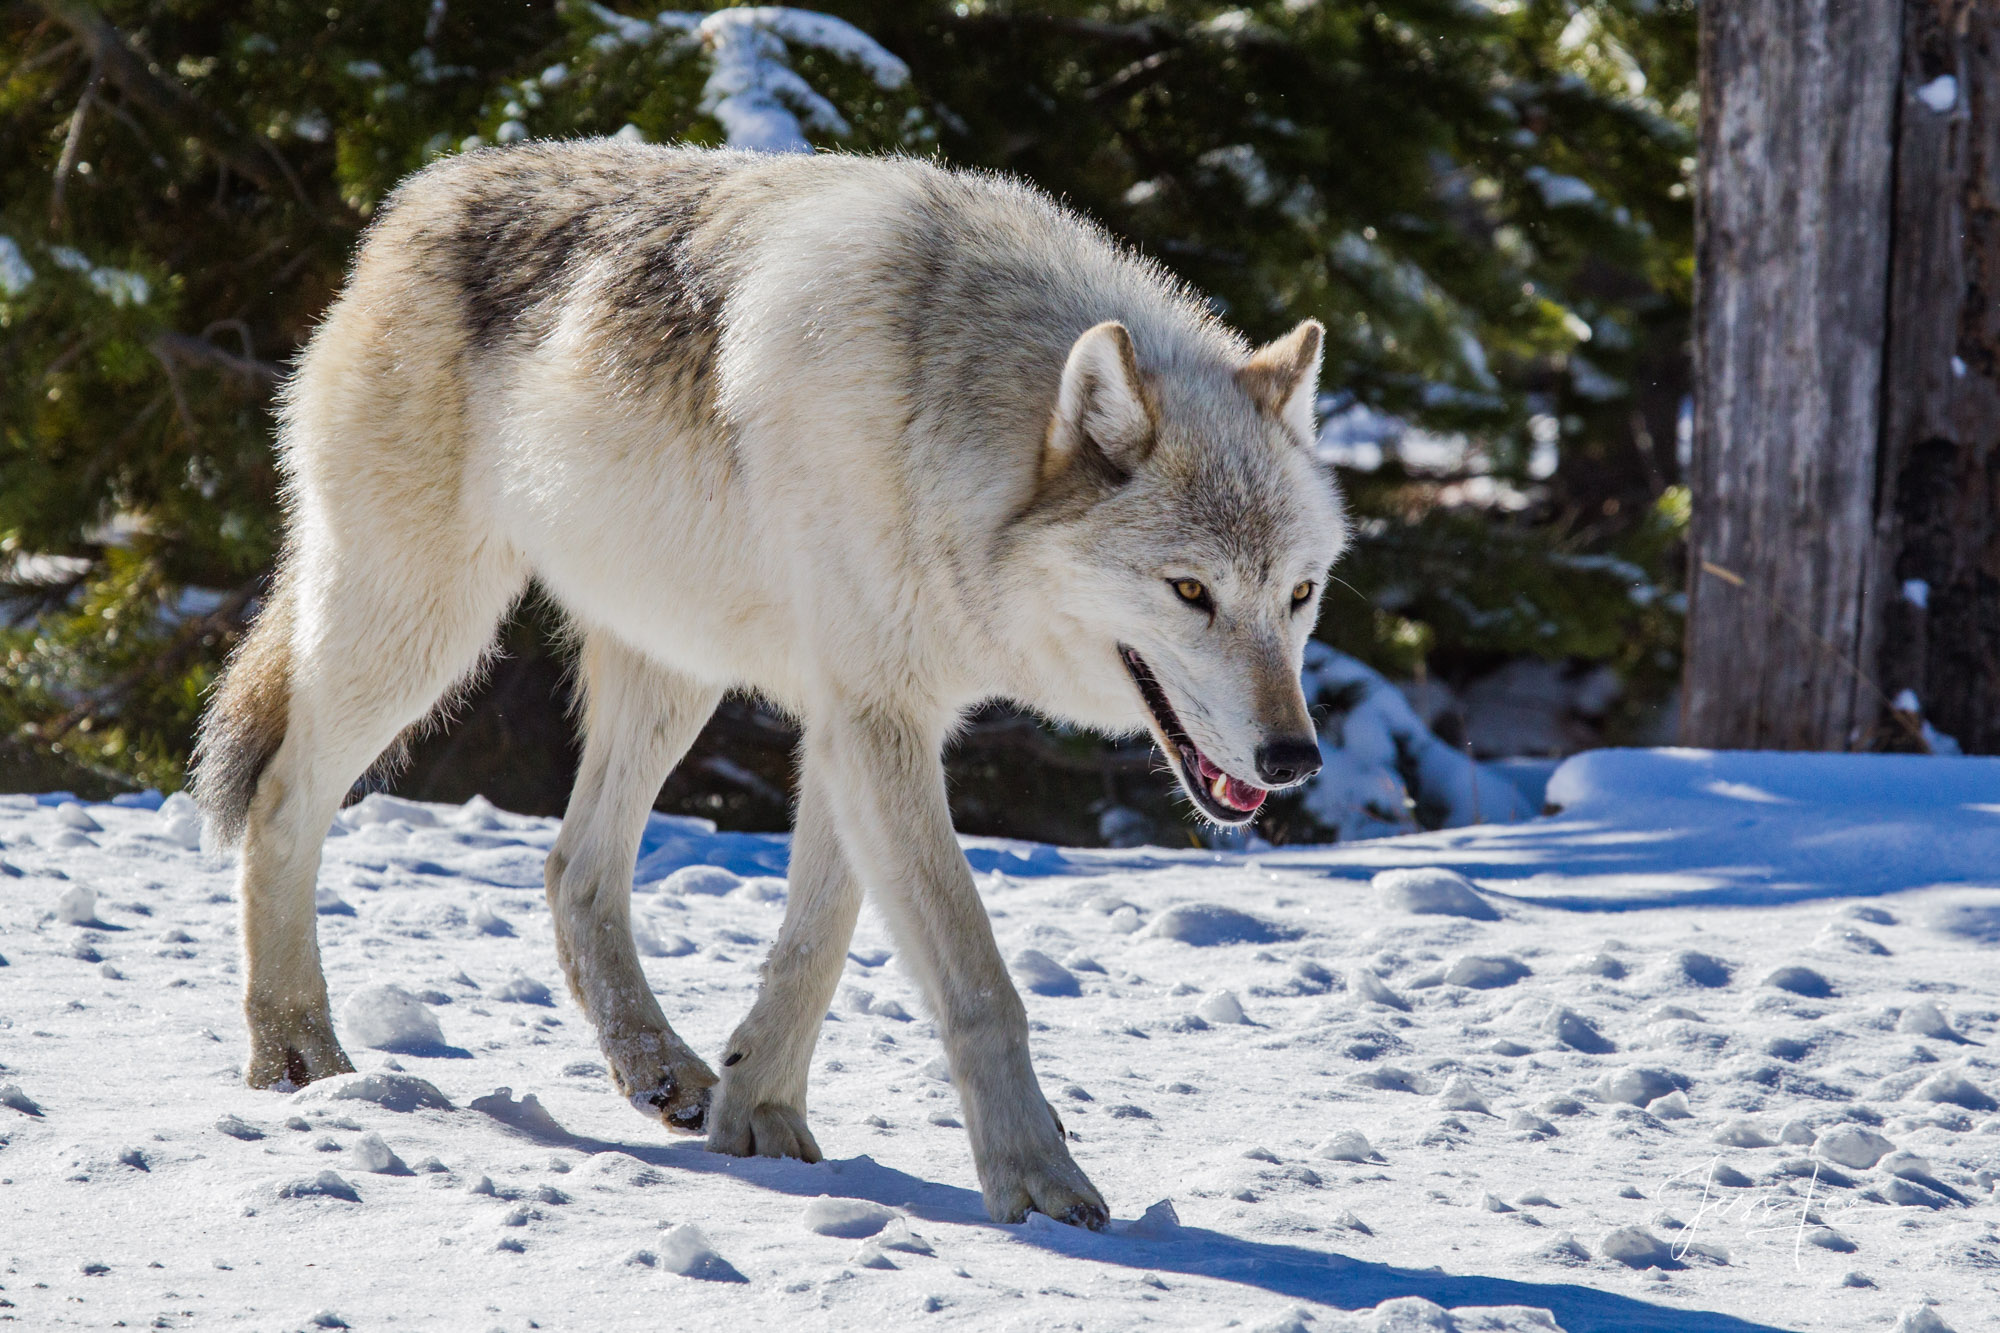 White Yellowstone Wolf in the Wild. Exclusive limited edition photo of 1200 prints by Jess Lee